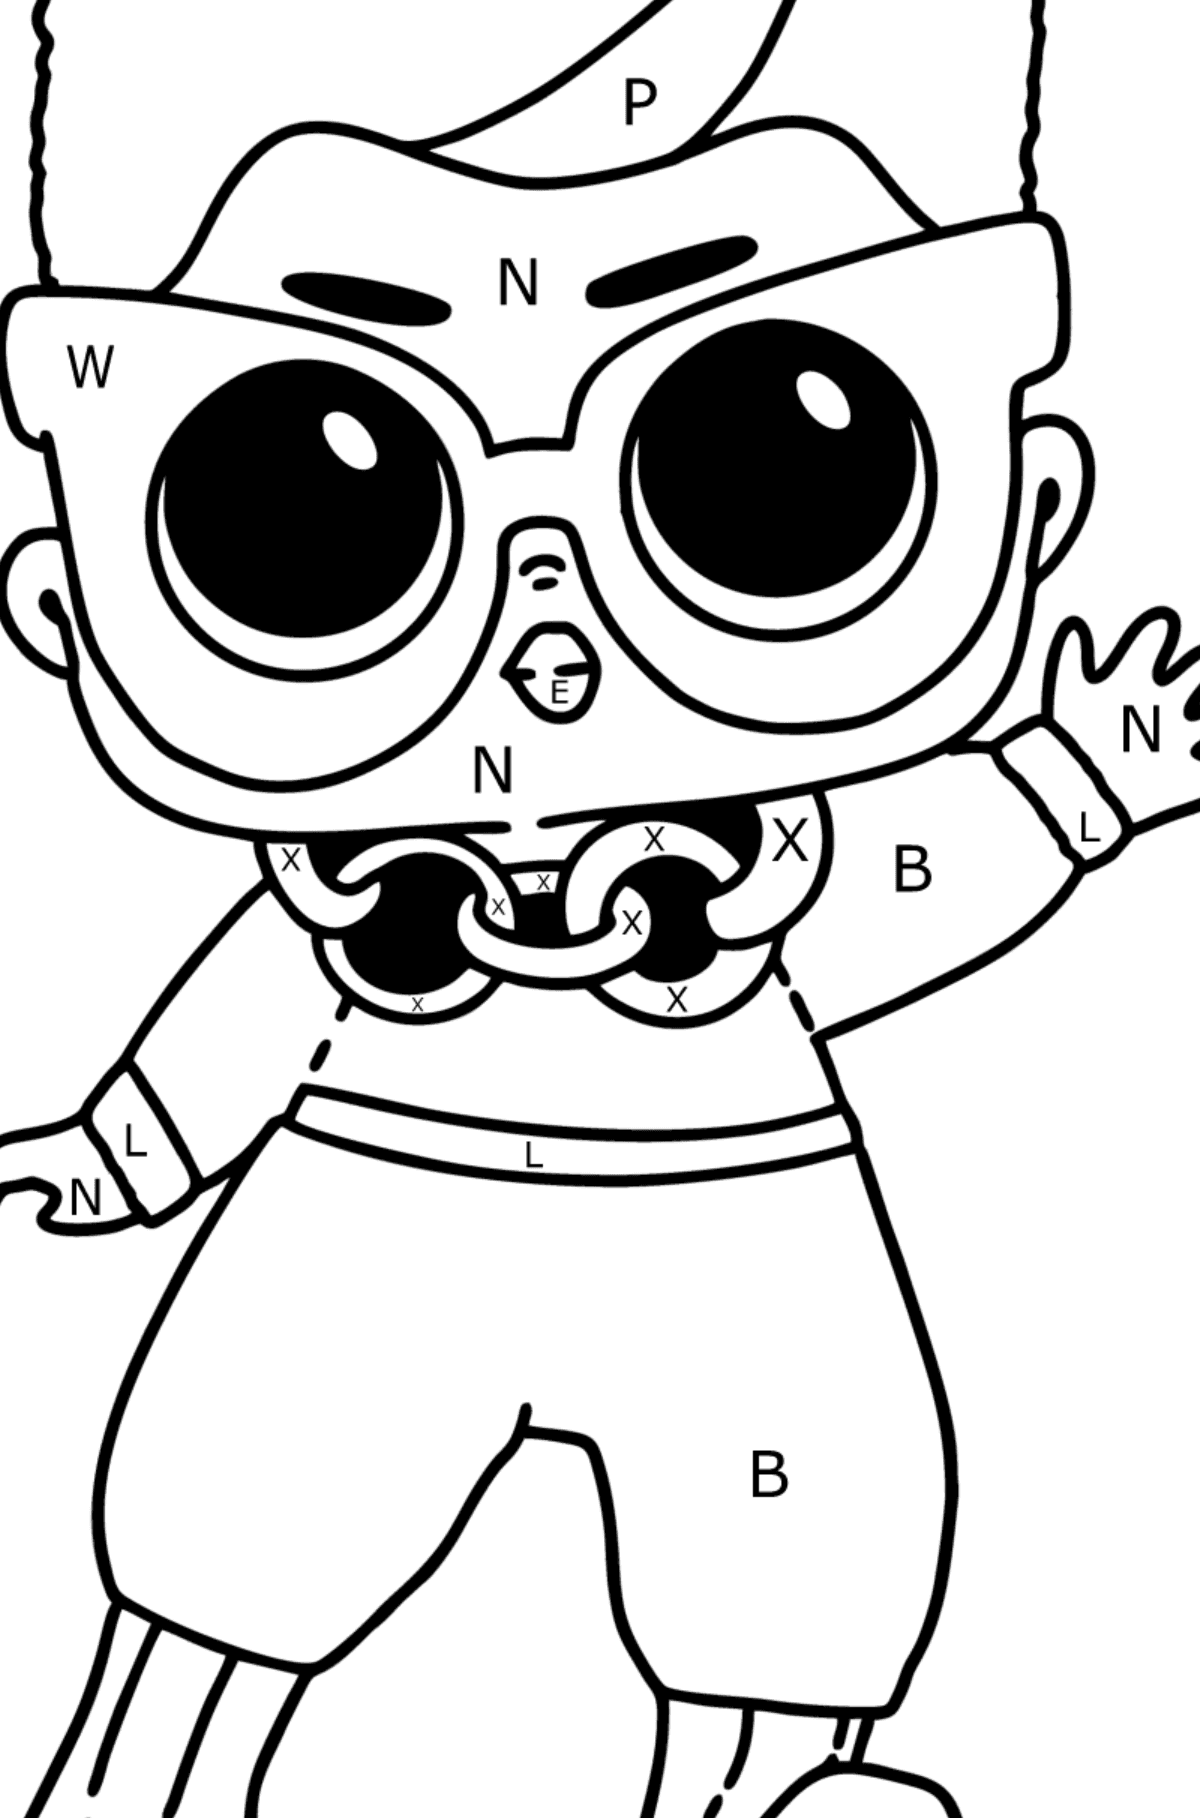 LOL Surprise Swaggie Doll Boy coloring page - Coloring by Letters for Kids